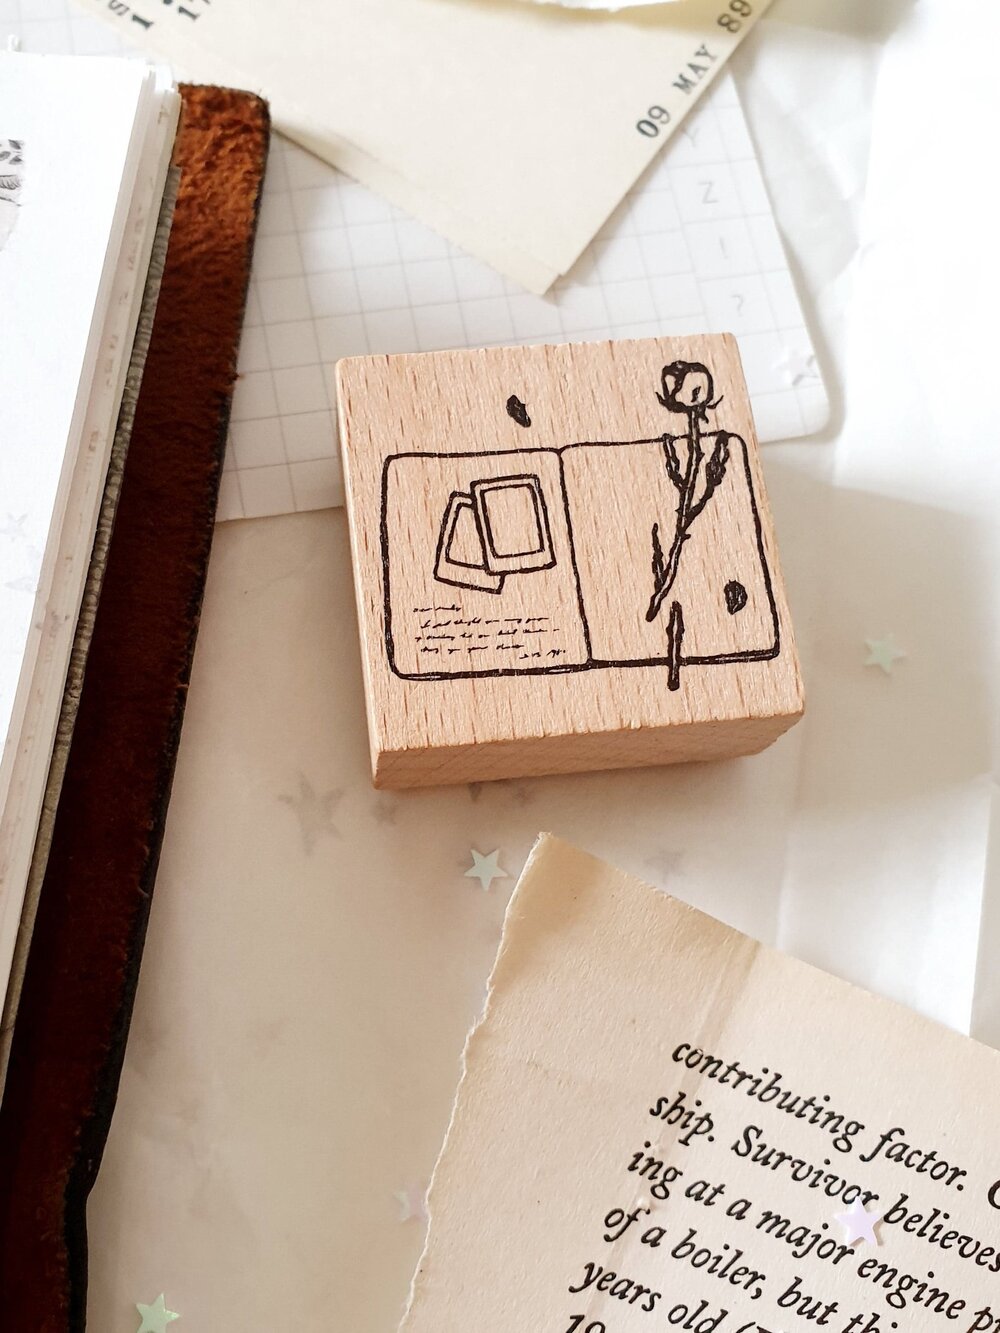 Yeon Charm Dear Diary Rubber Stamp, 1 pc